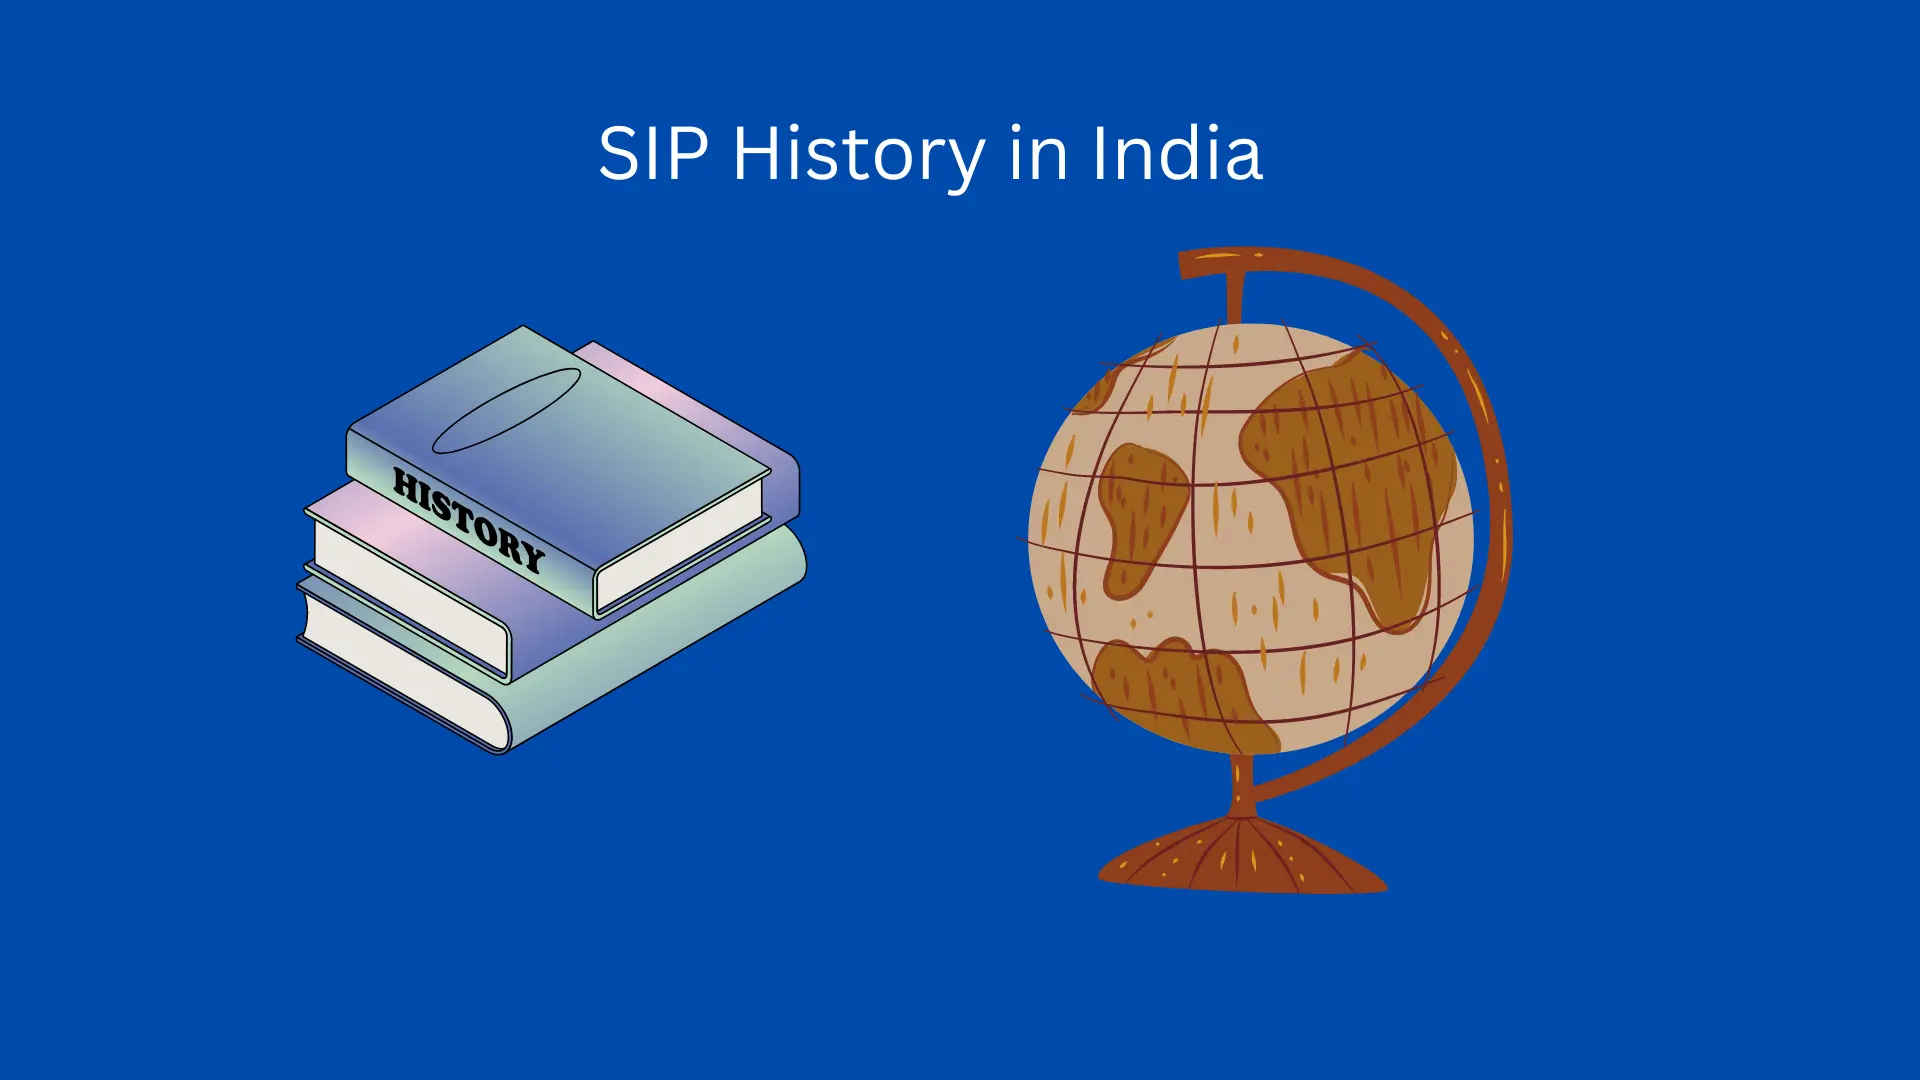 SIP History in India: Tracing the Evolution and Growth of Systematic Investment Plans